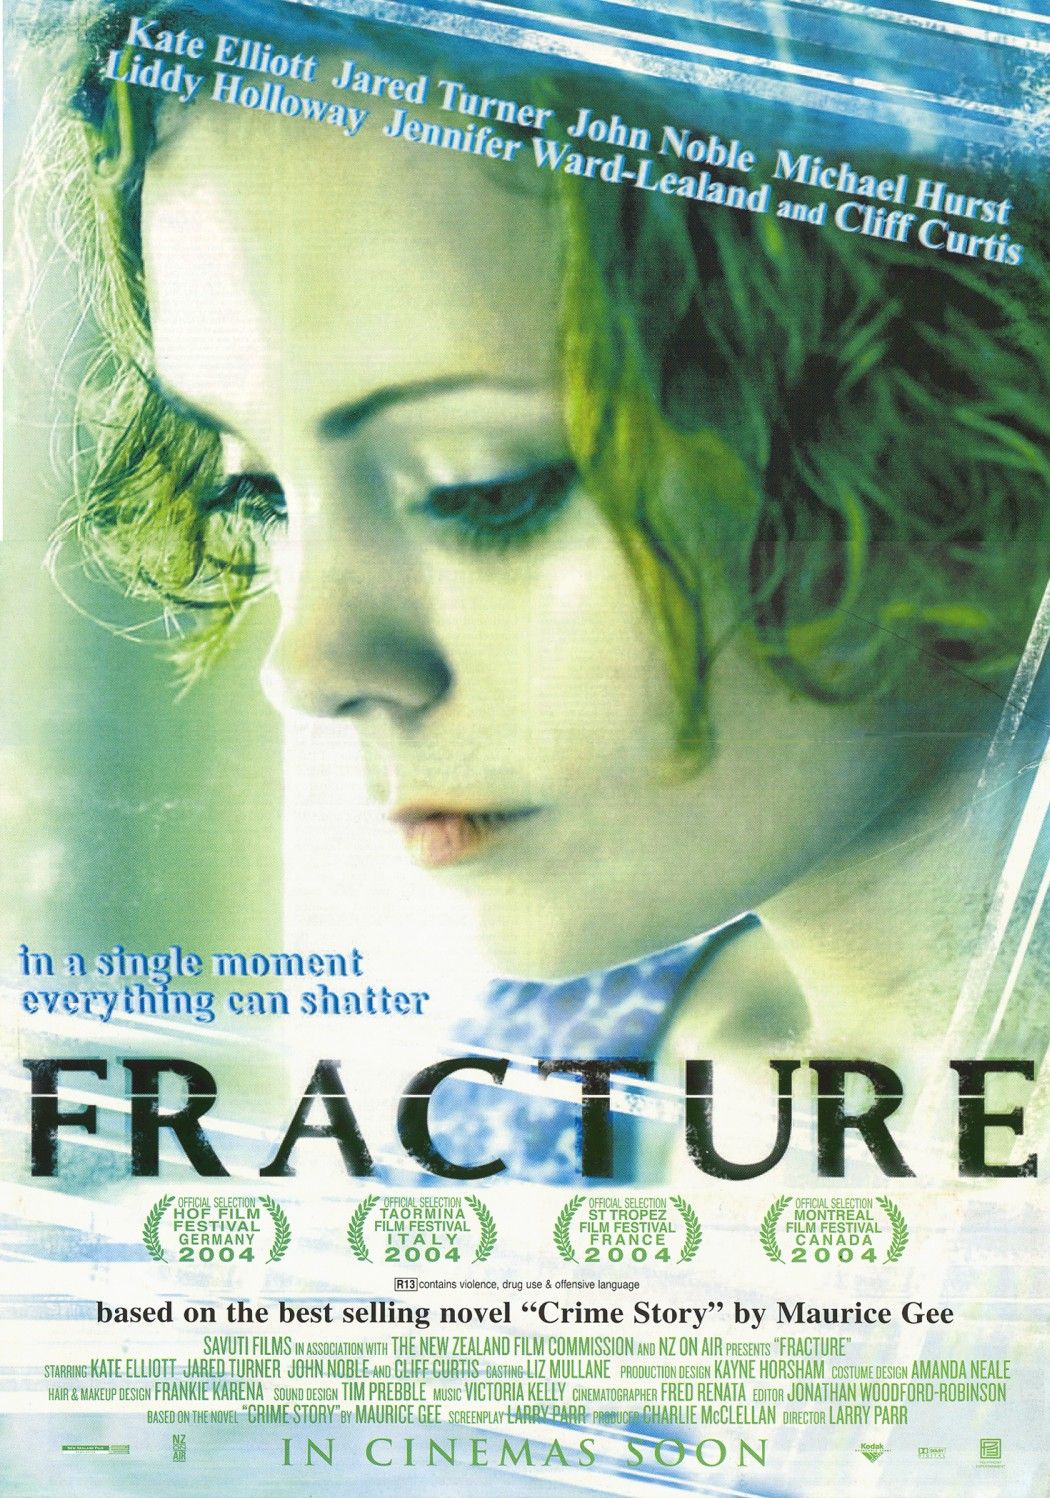 Extra Large Movie Poster Image for Fracture 